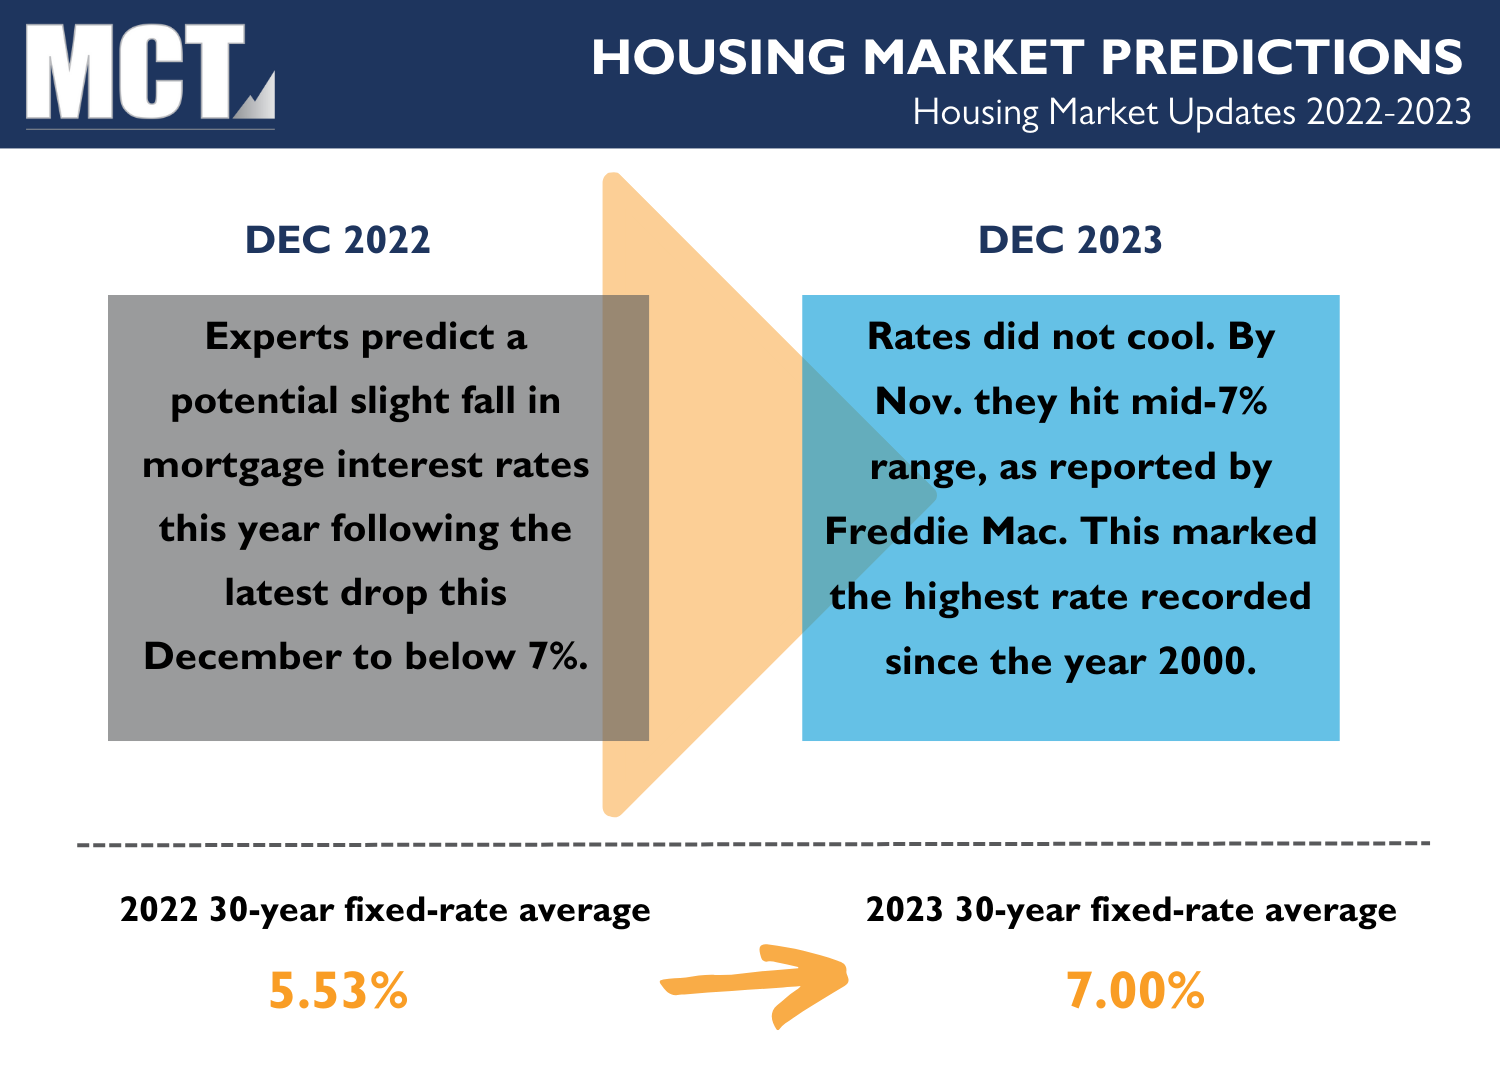 MCT infographic informing about the mortgage interest rates trends in the current housing market.